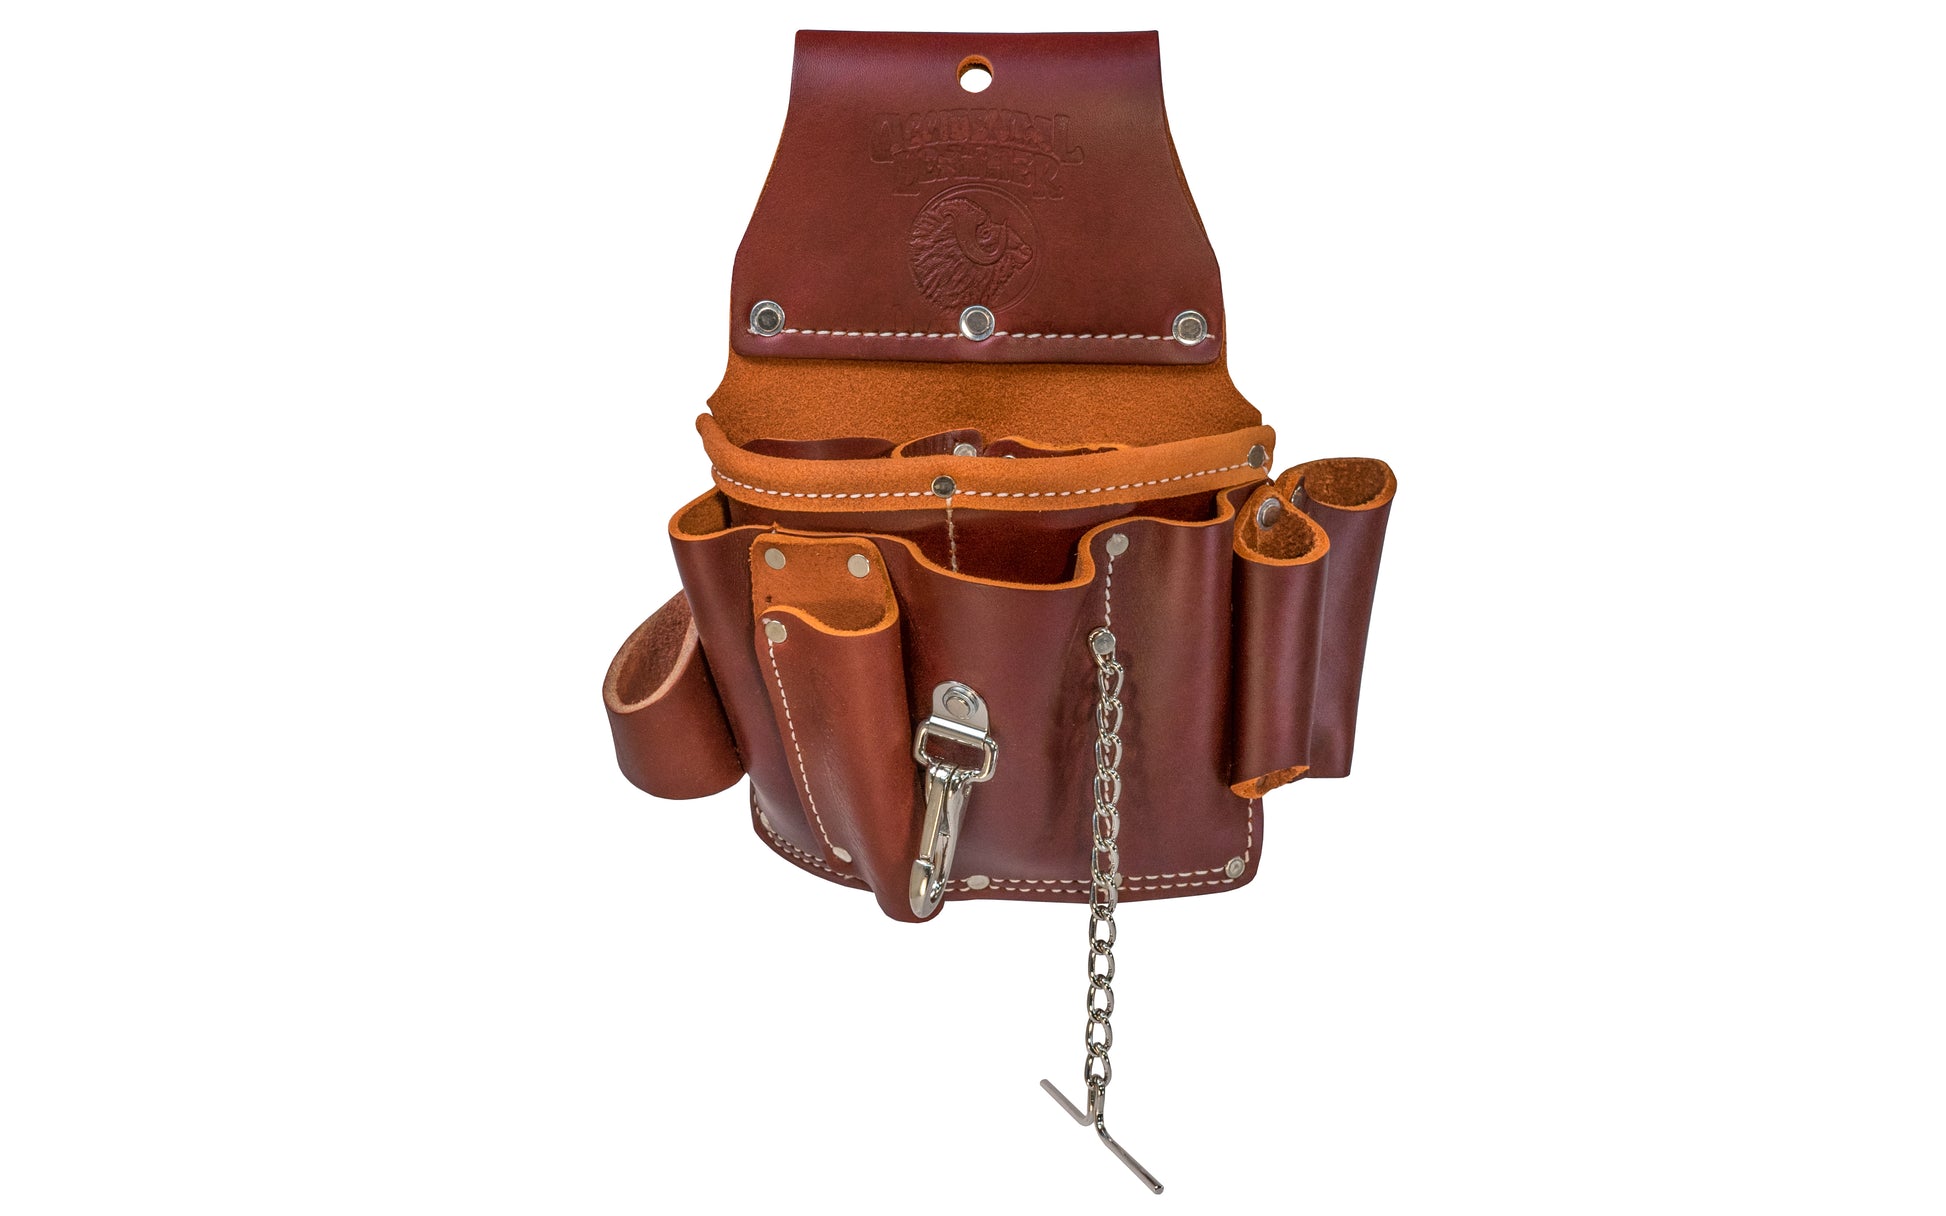 Occidental Leather Electrician's Pouch Model 5049 - 15 pockets & tool holders for most frequently used tools. Includes loop for flashlight, chain for electrical tape, quick release tool snap, heavy duty hammer holder, pockets for screw drivers & specialized tools. Tunnel loop on back accepts up to 3" work belt.